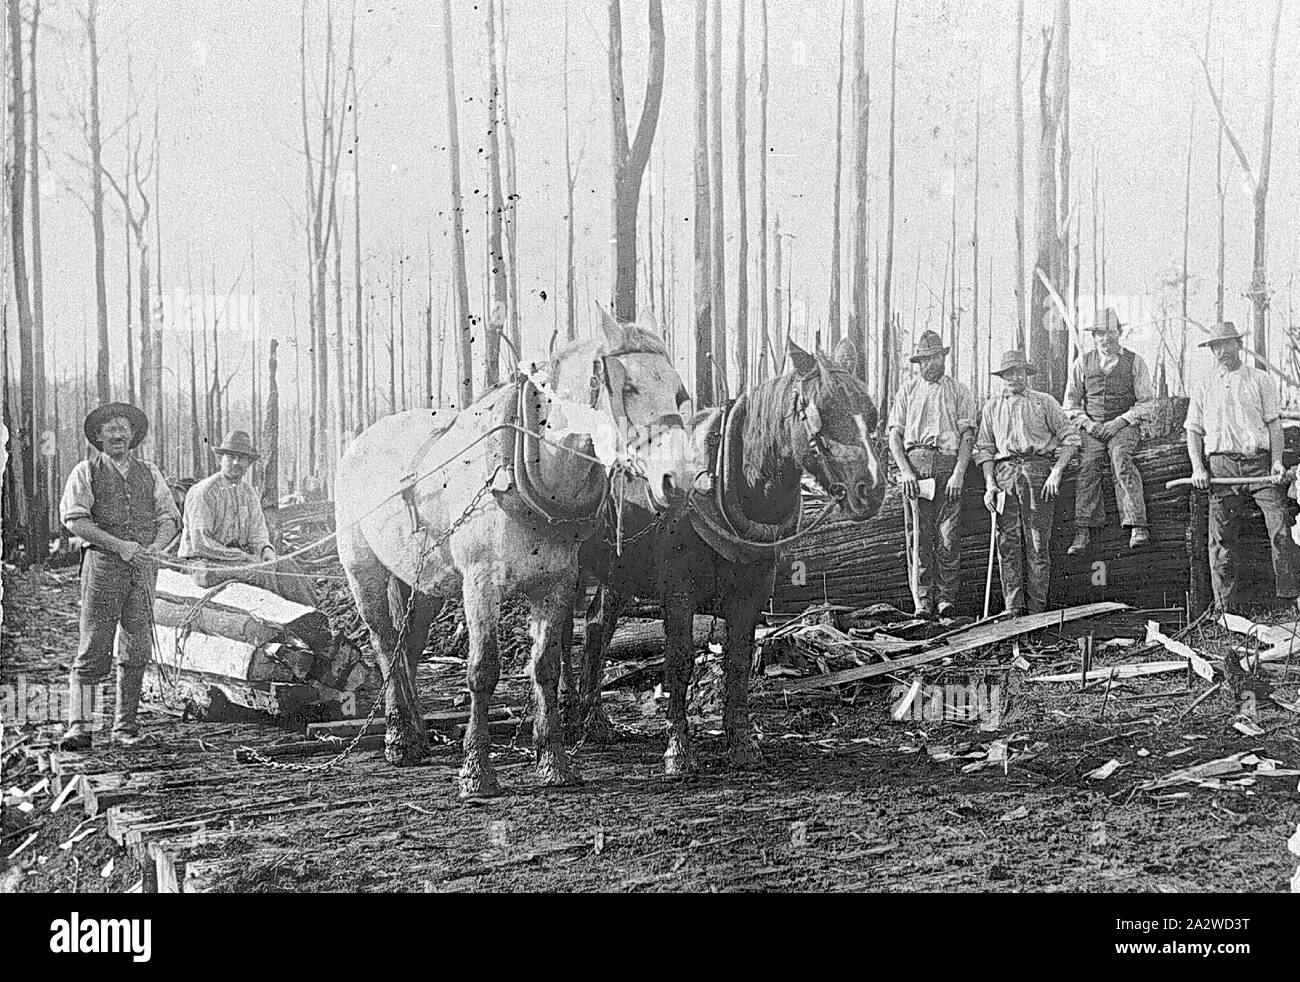 Negative - Horse Team Pulling Timber on Sled, Lavers Hill District, Victoria, circa 1895, A horse team pulling timber on sled. There has apparently been a bushfire through the area. There is a group of workers around the horse team, some of the men are holding axes Stock Photo